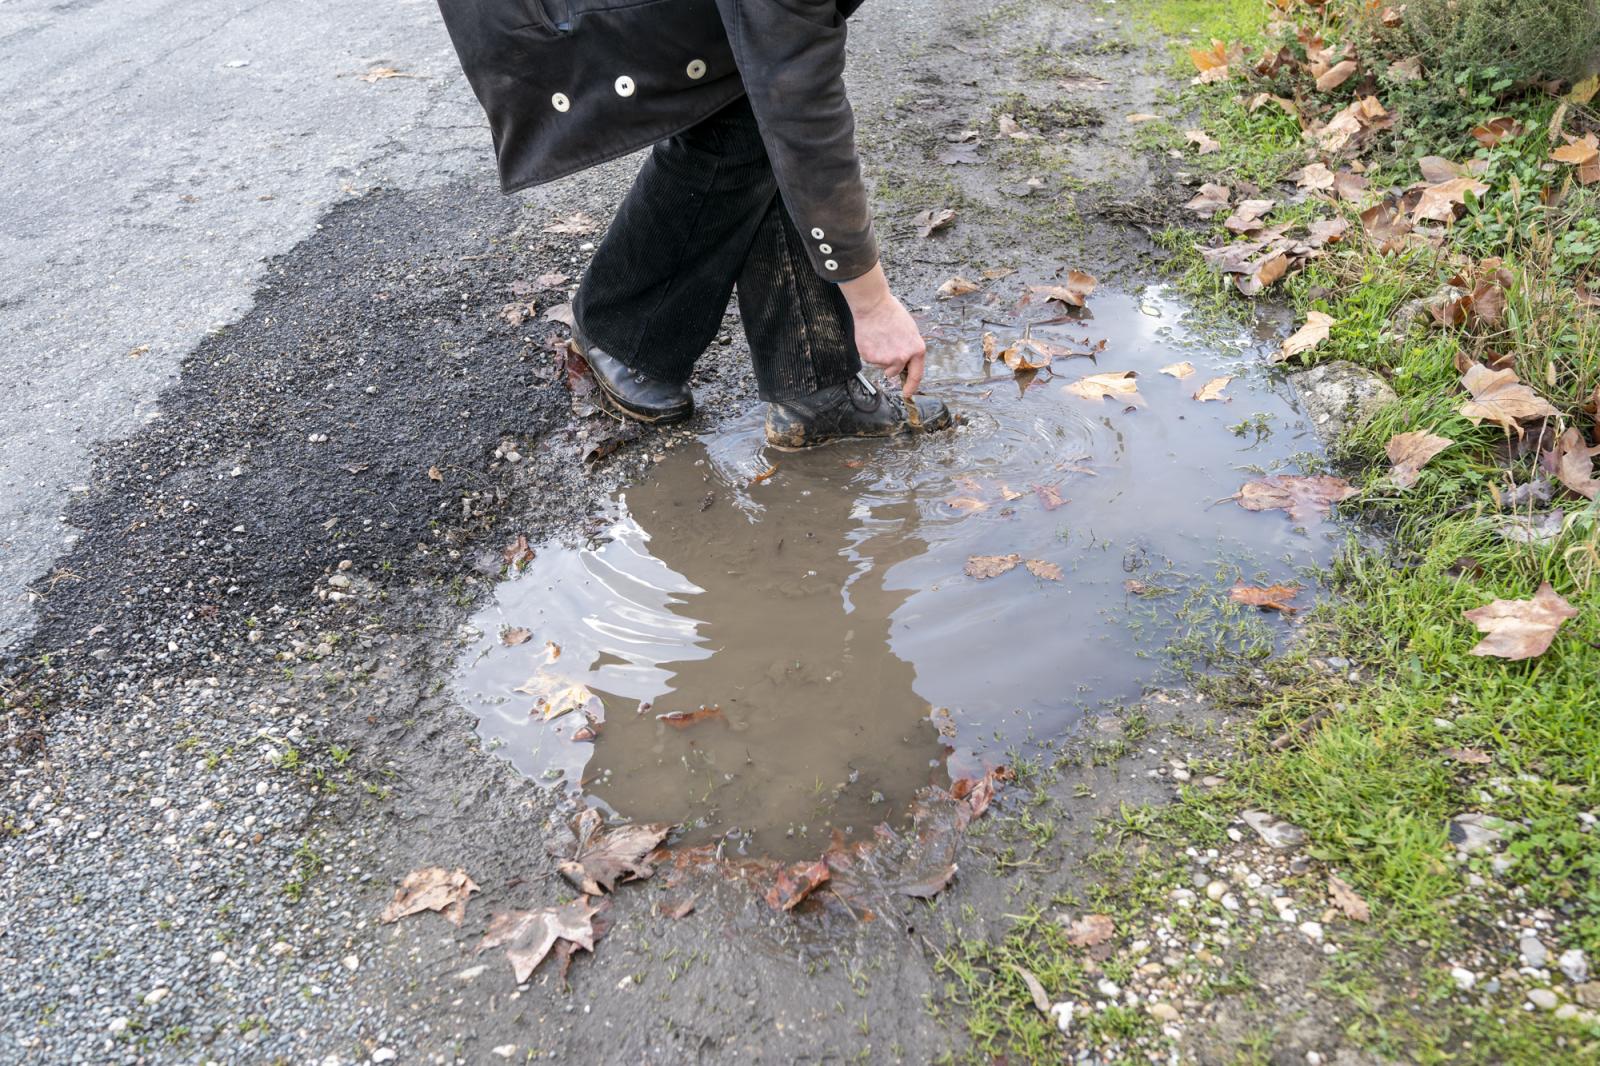   -  Ben gets rid of mud stuck on his boots using a small wooden stick and the water of a puddle, in...